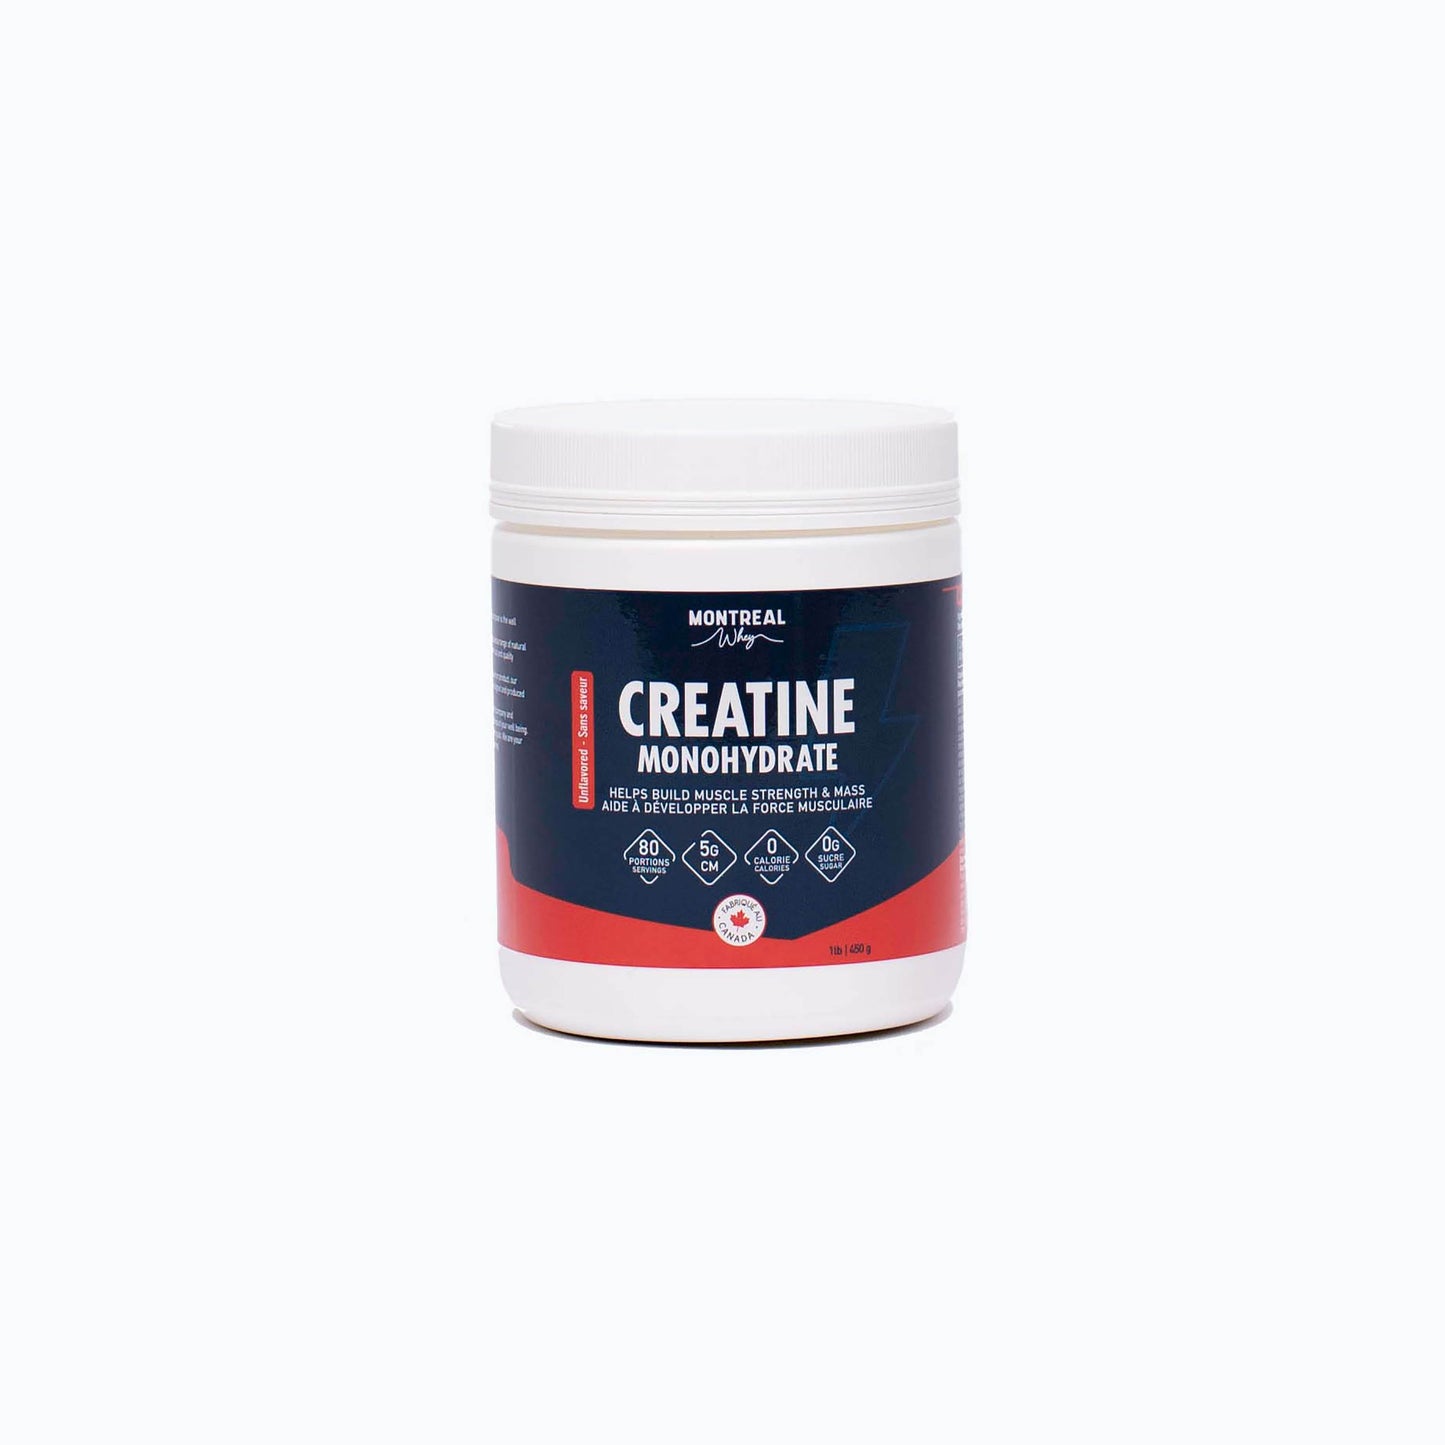 Creatine by Montreal Whey